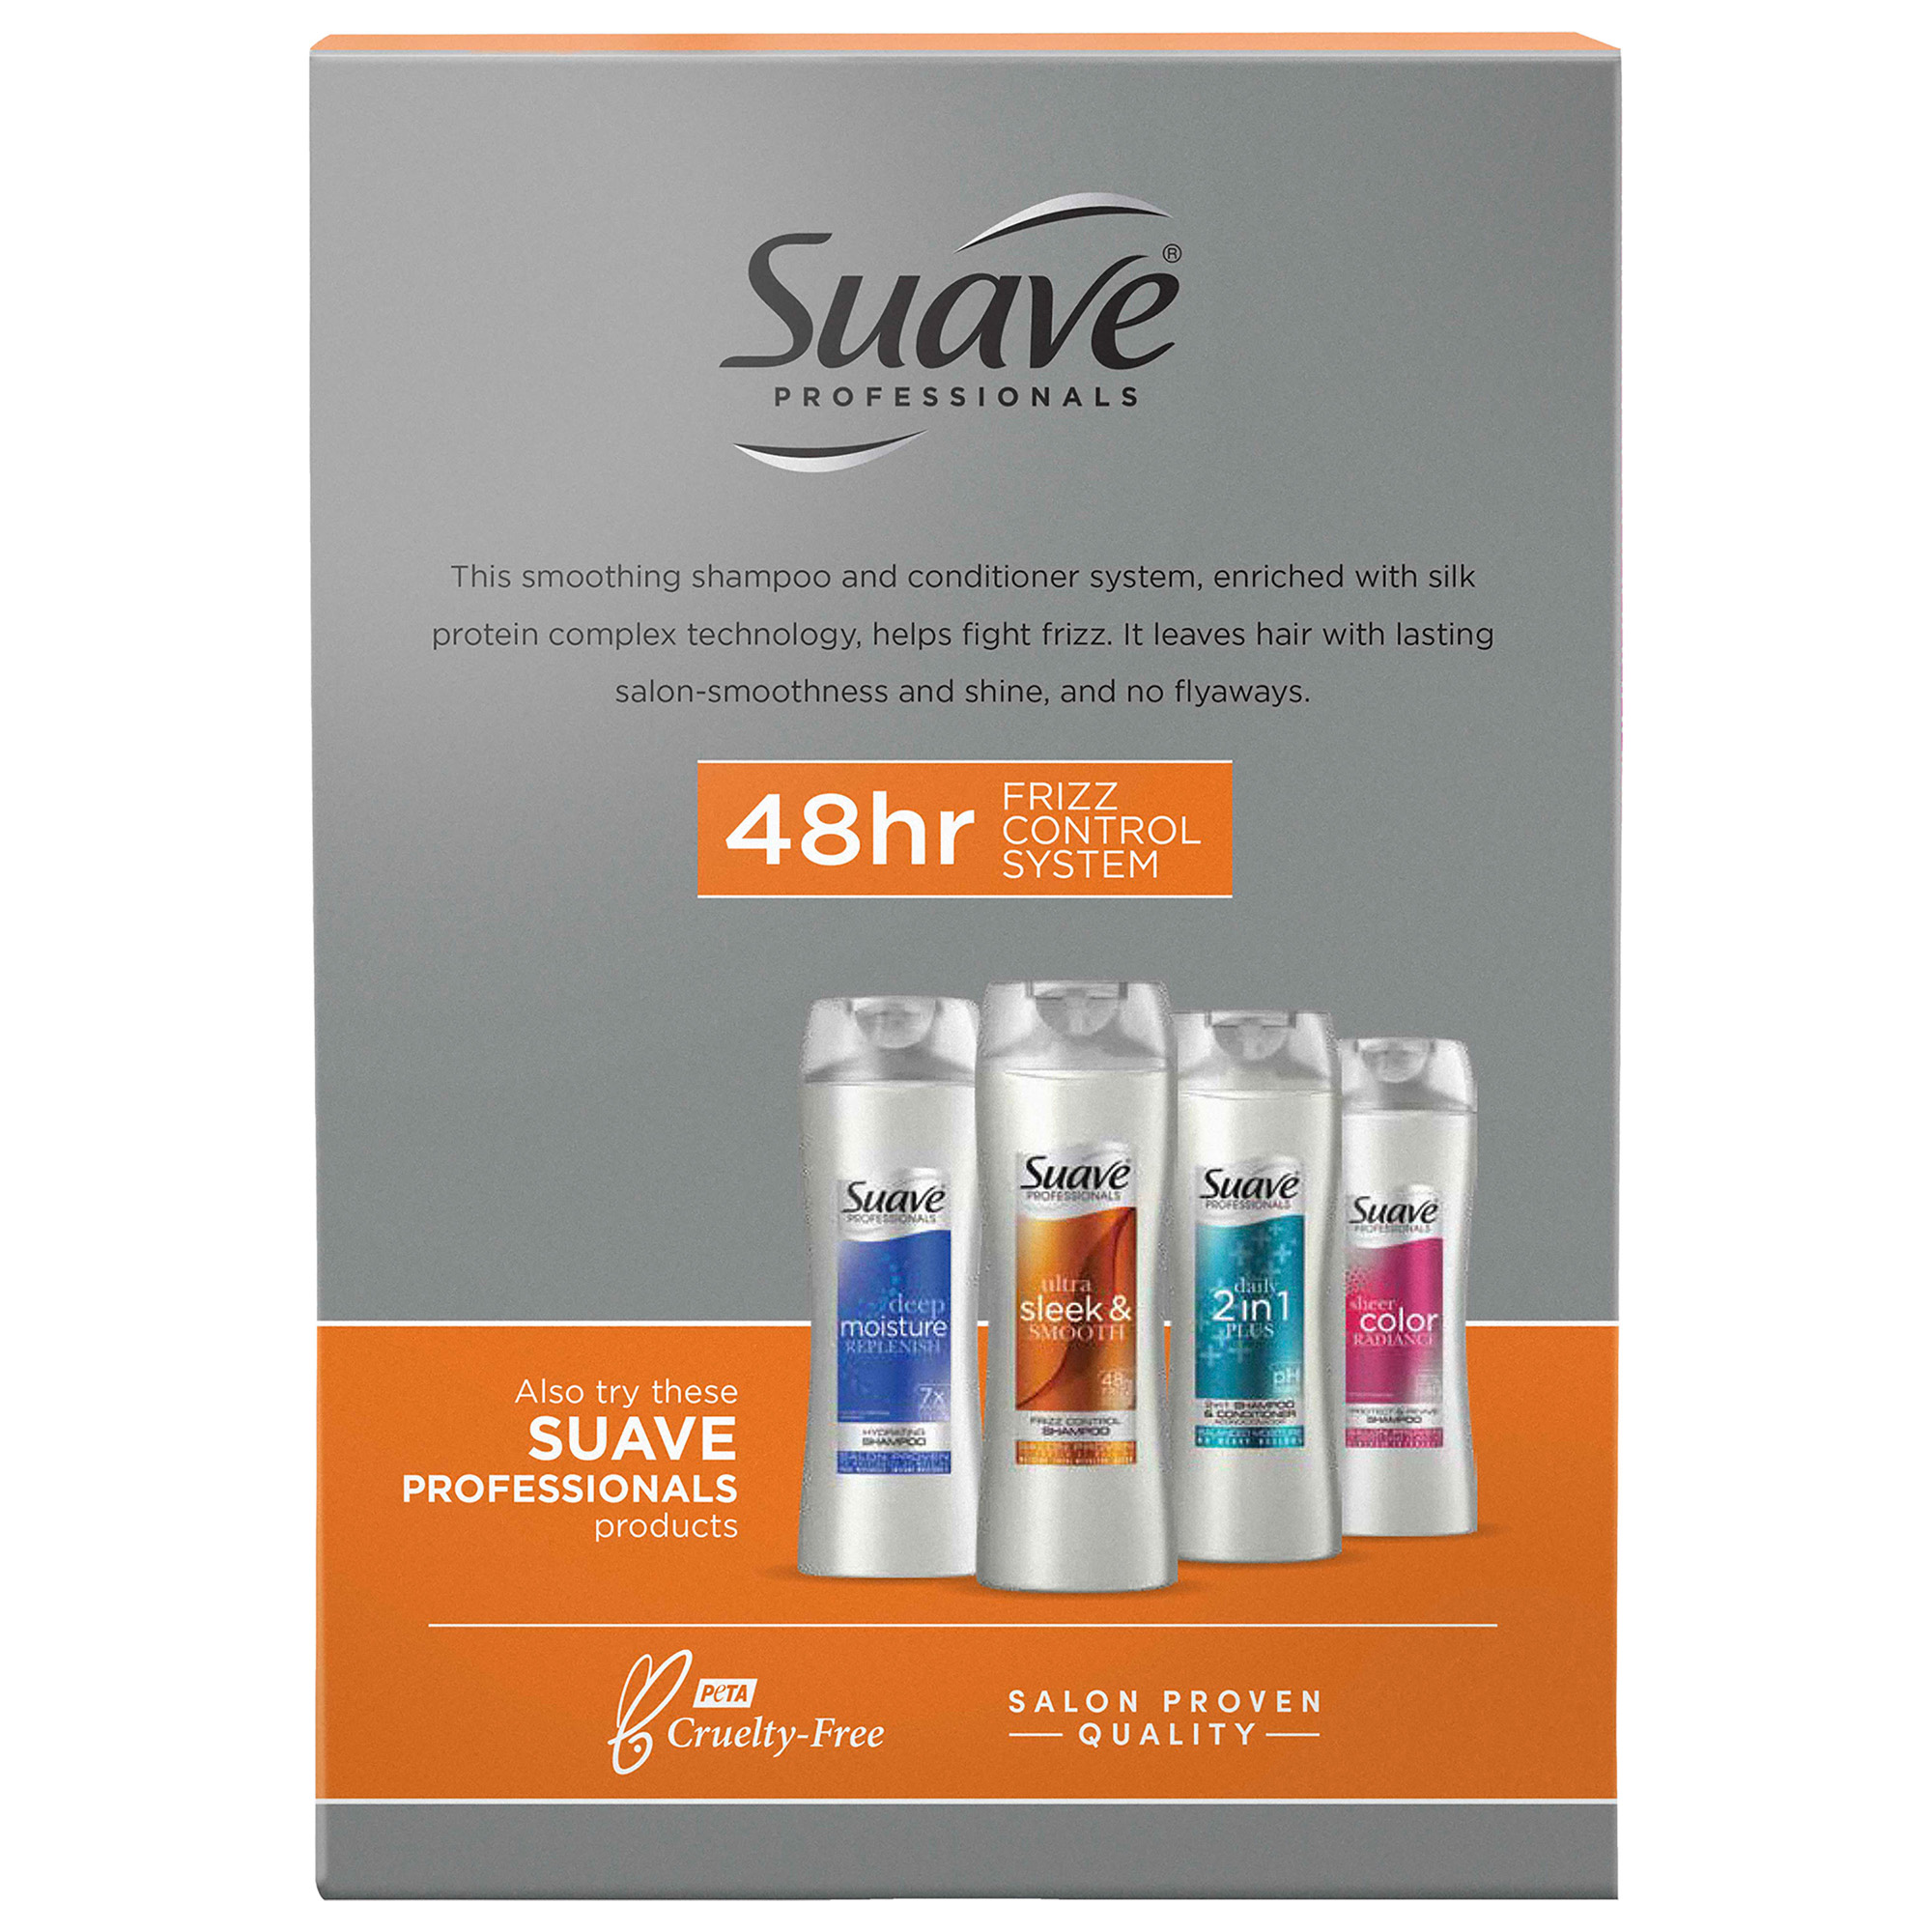 Suave Professionals Clarifying Frizz Control Daily Shampoo & Conditioner with Peptides & Vitamin E, Scented, Full Size Set, 2 Pack - image 3 of 11